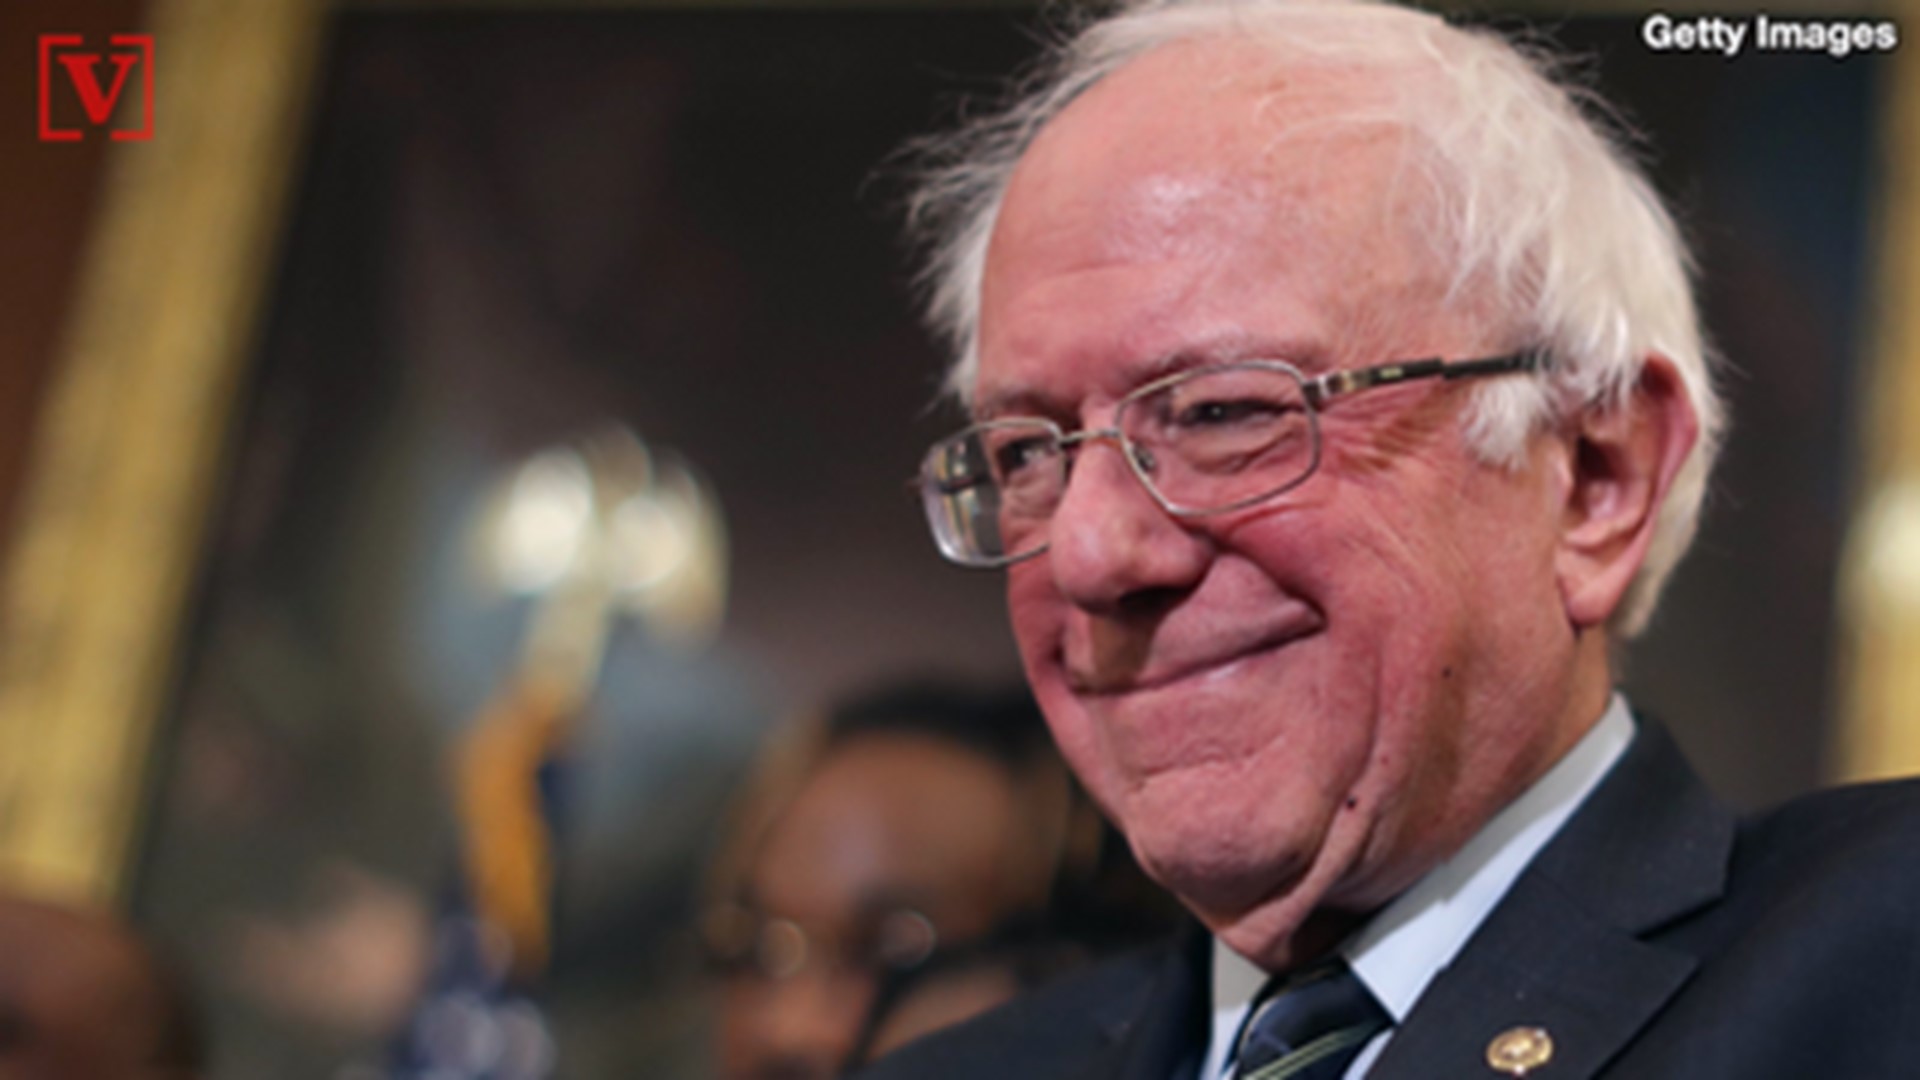 While Bernie Sanders has called for the federal minimum wage to increase to $15 an hour, members of his campaign staff are requesting they make at least that amount. Veuer's Justin Kircher has the story.